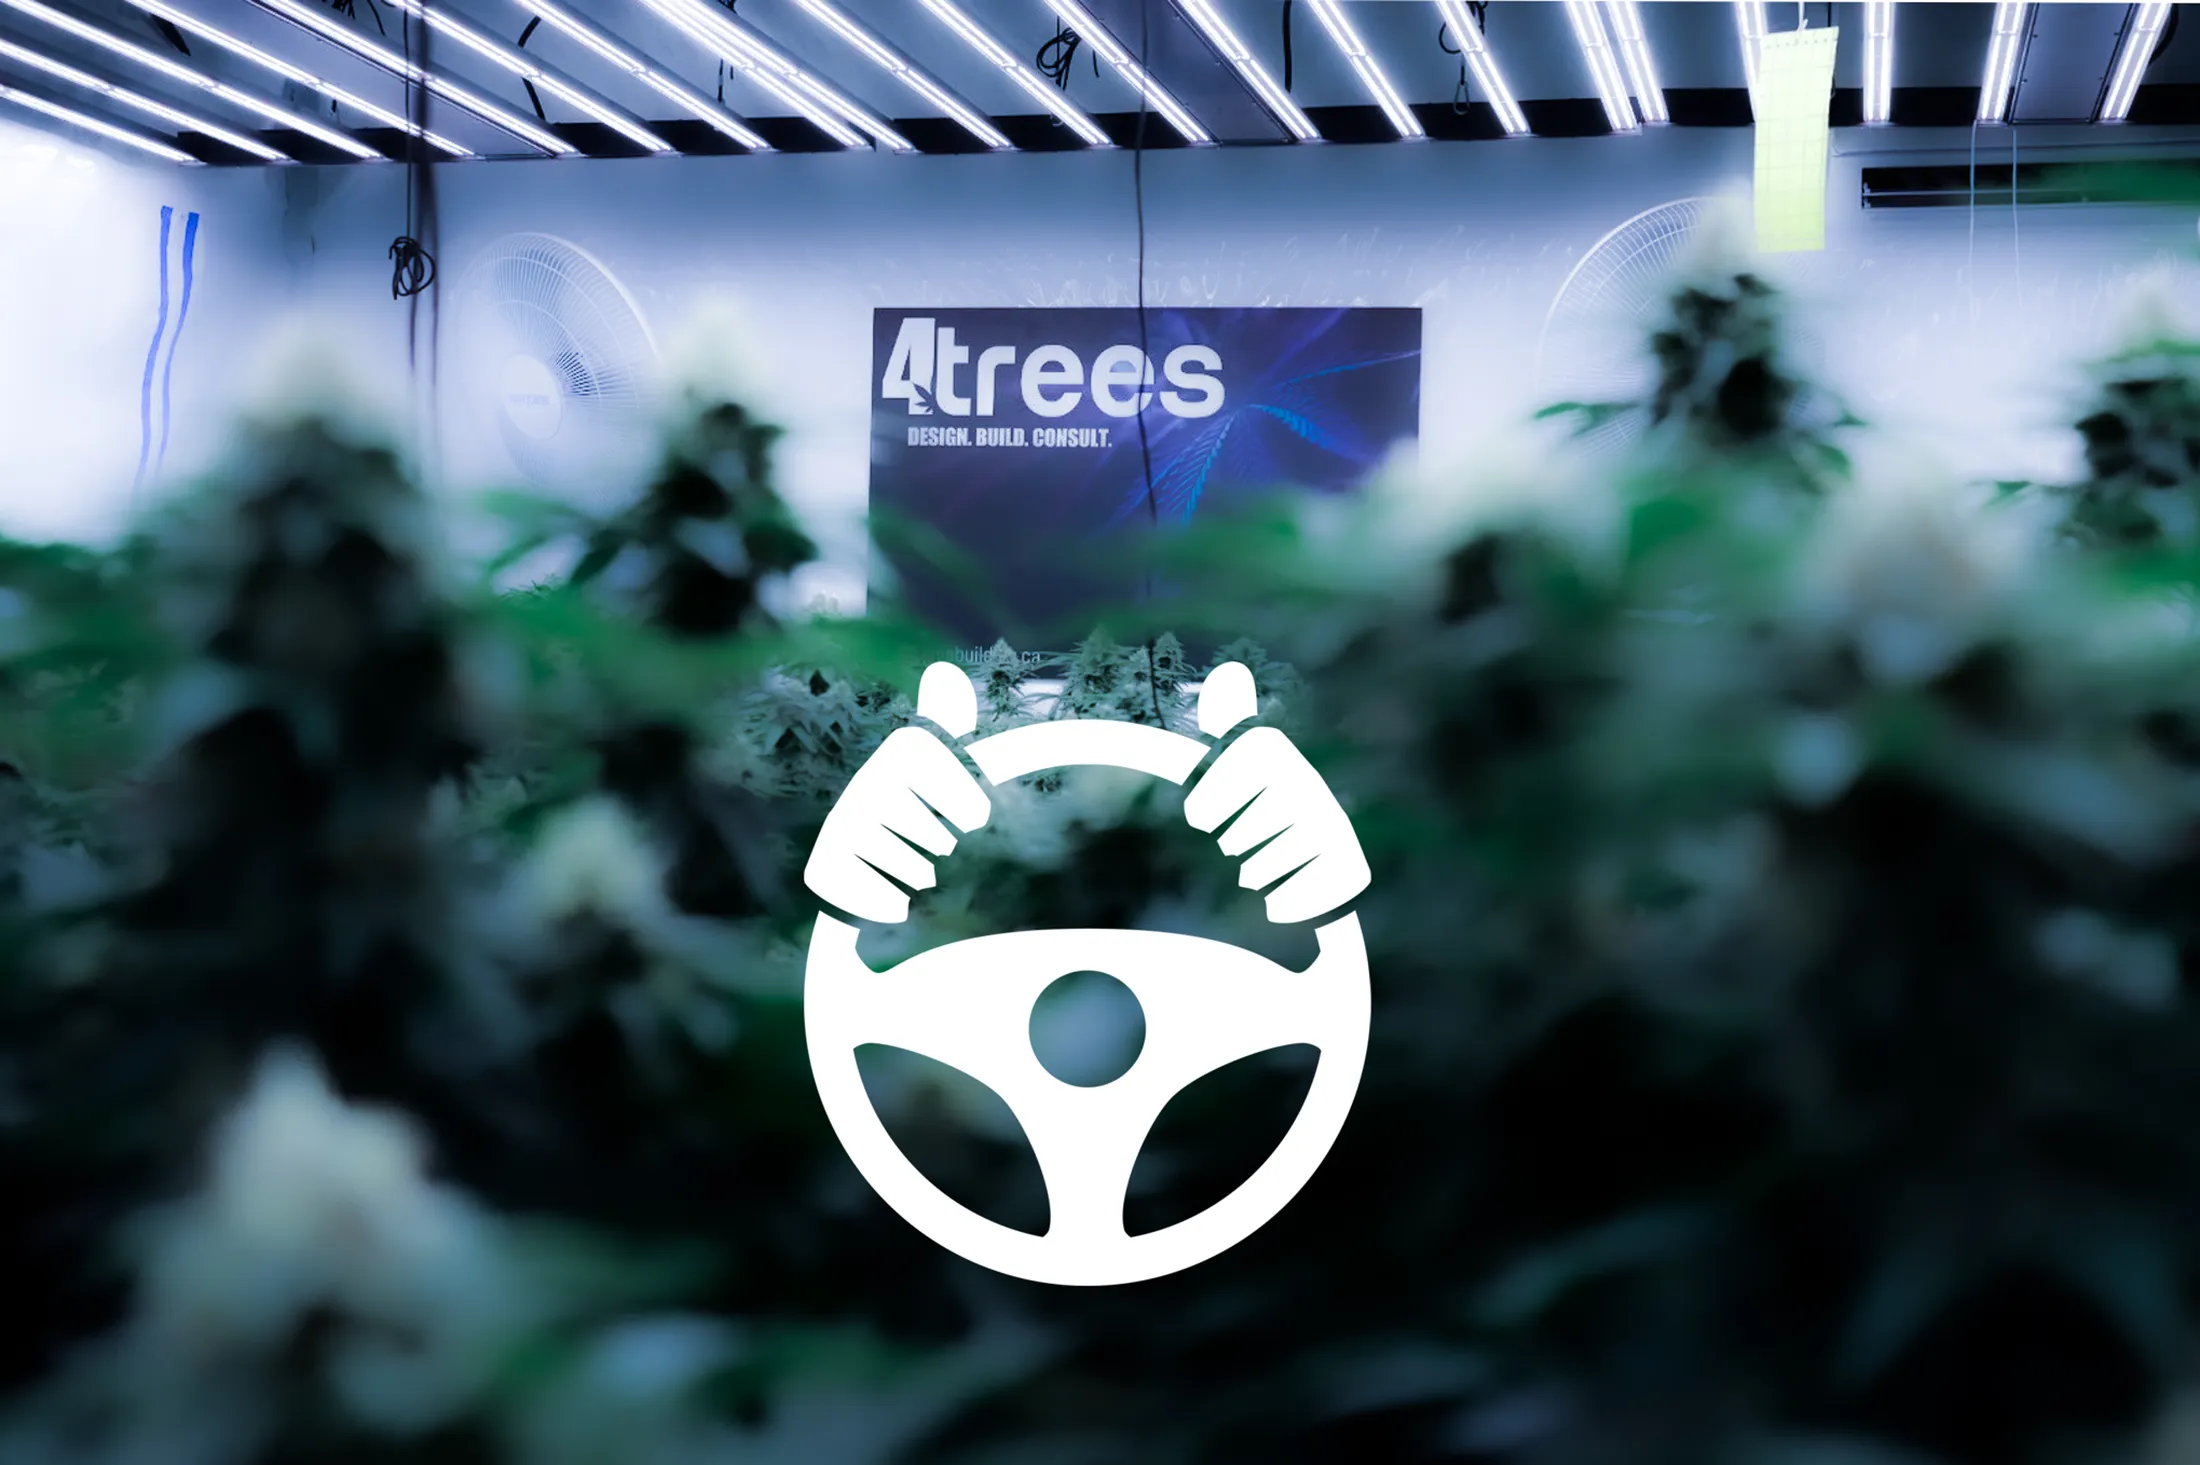 Grow room with 4trees sign in background and steering wheel icon in white